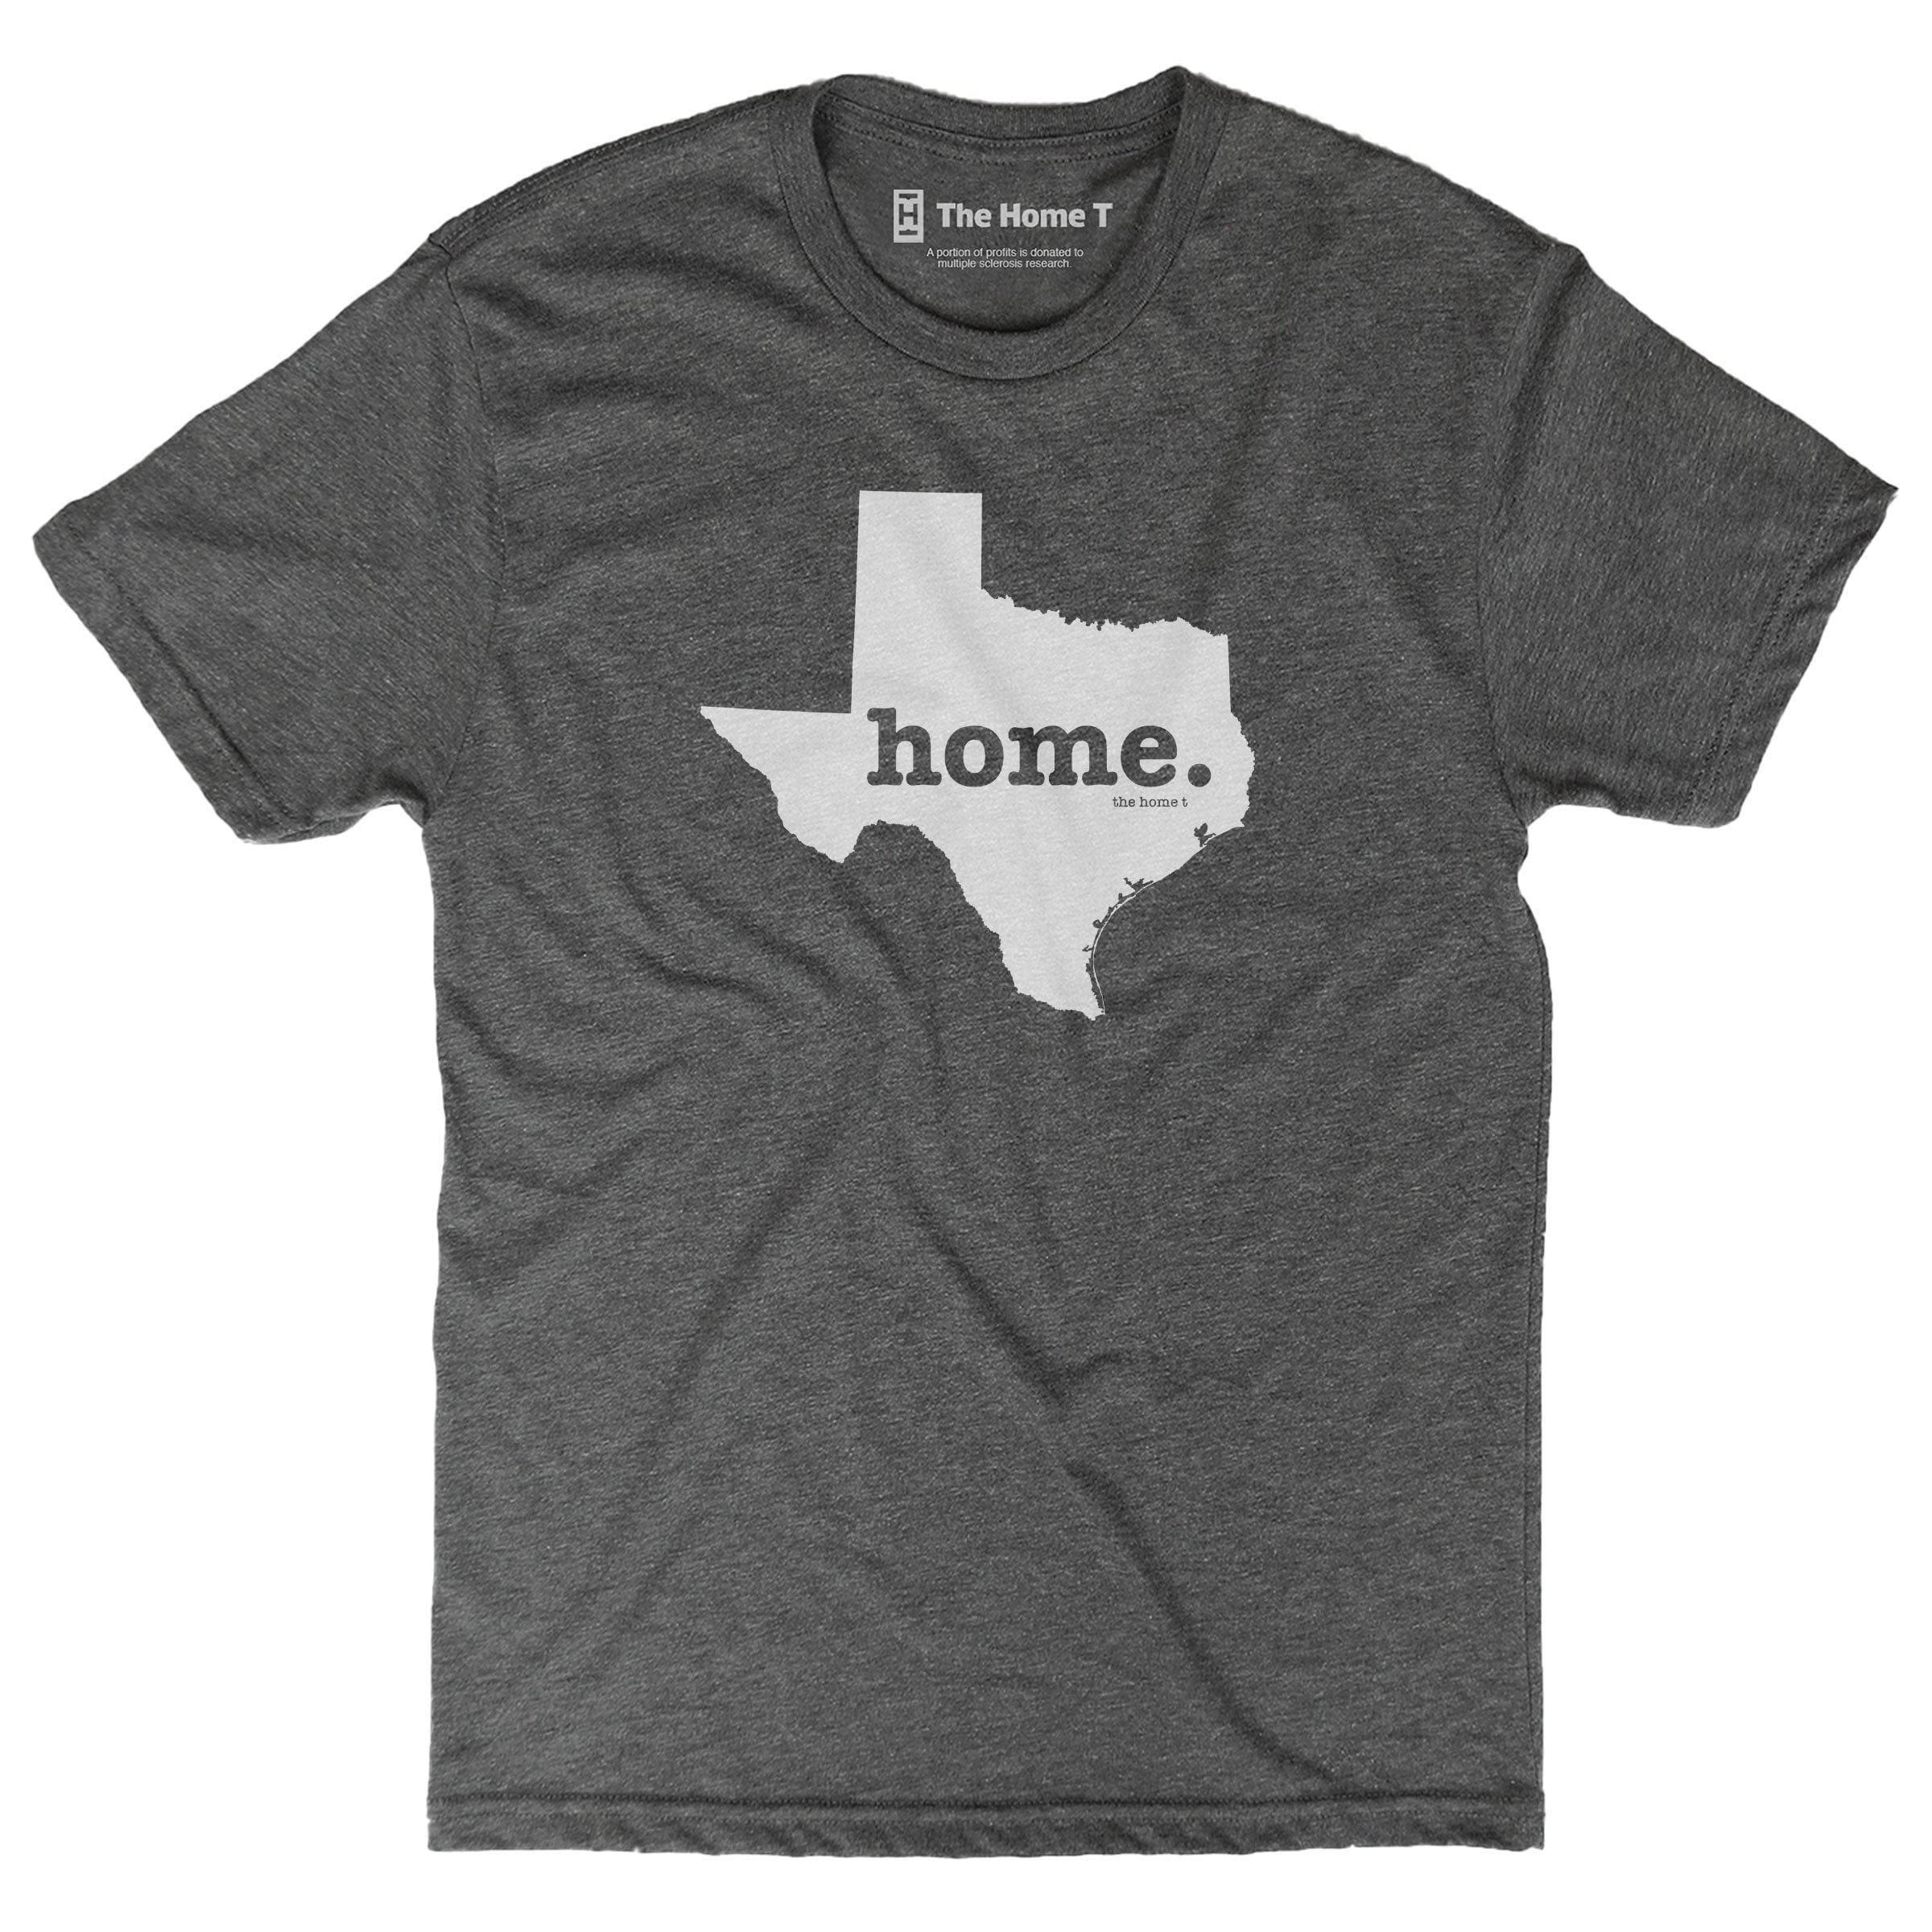 Houston Texas Inspired Soft Semi-fitted Adult Unisex T-shirt 